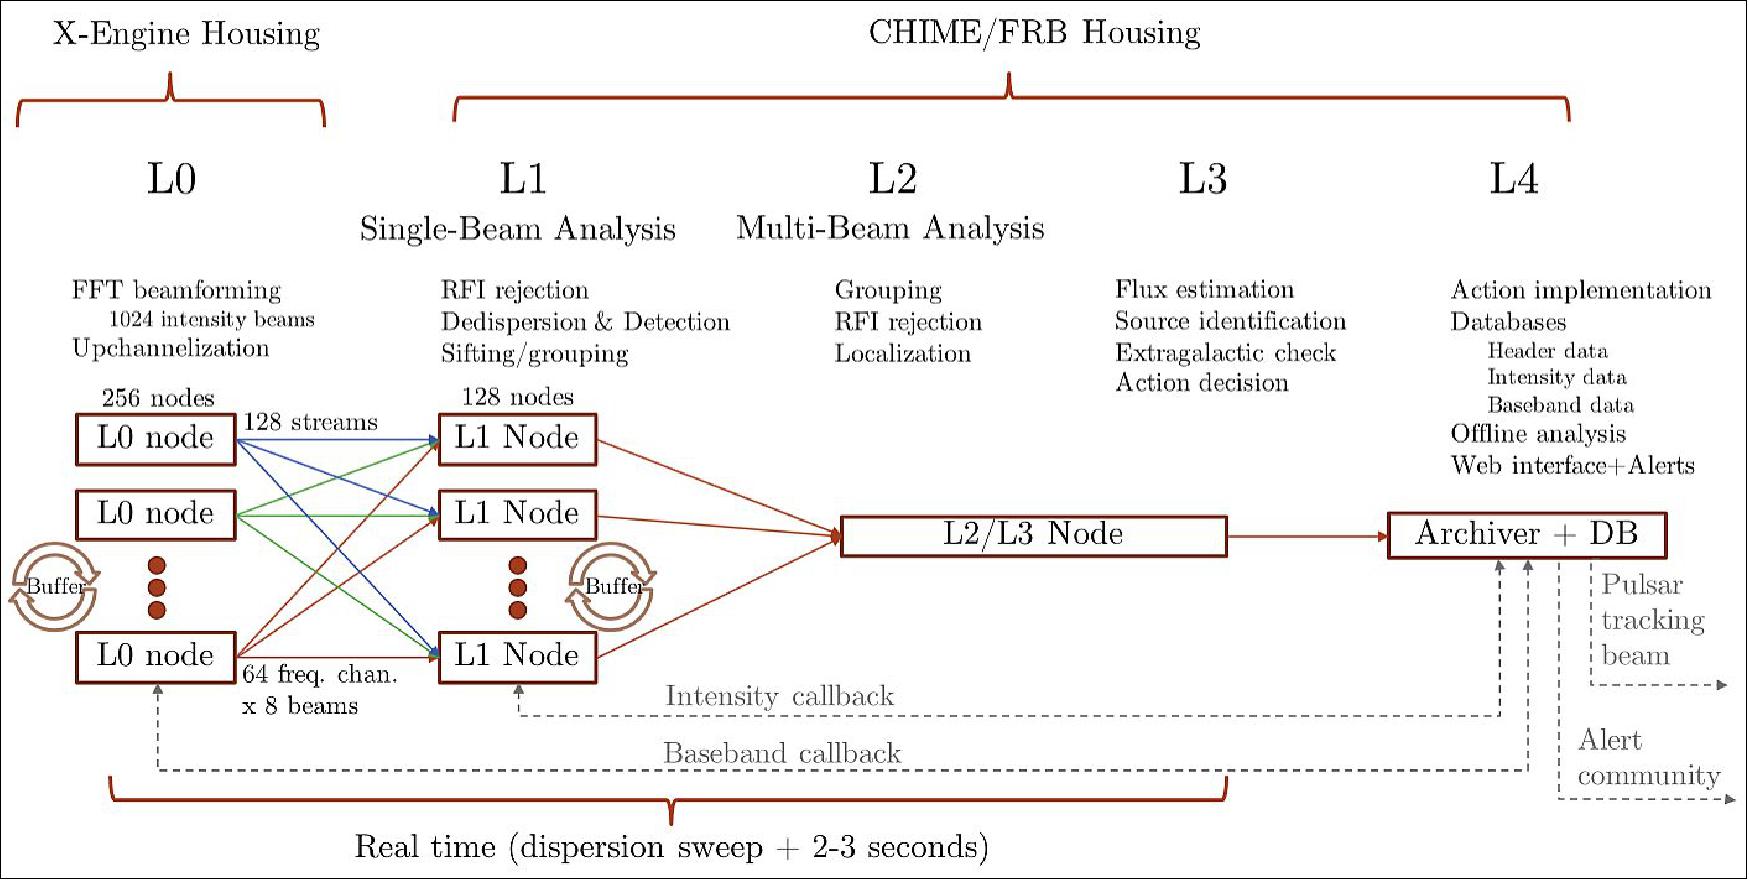 Figure 10: Schematic of the CHIME/FRB software pipeline (image credit: CHIME Collaboration)